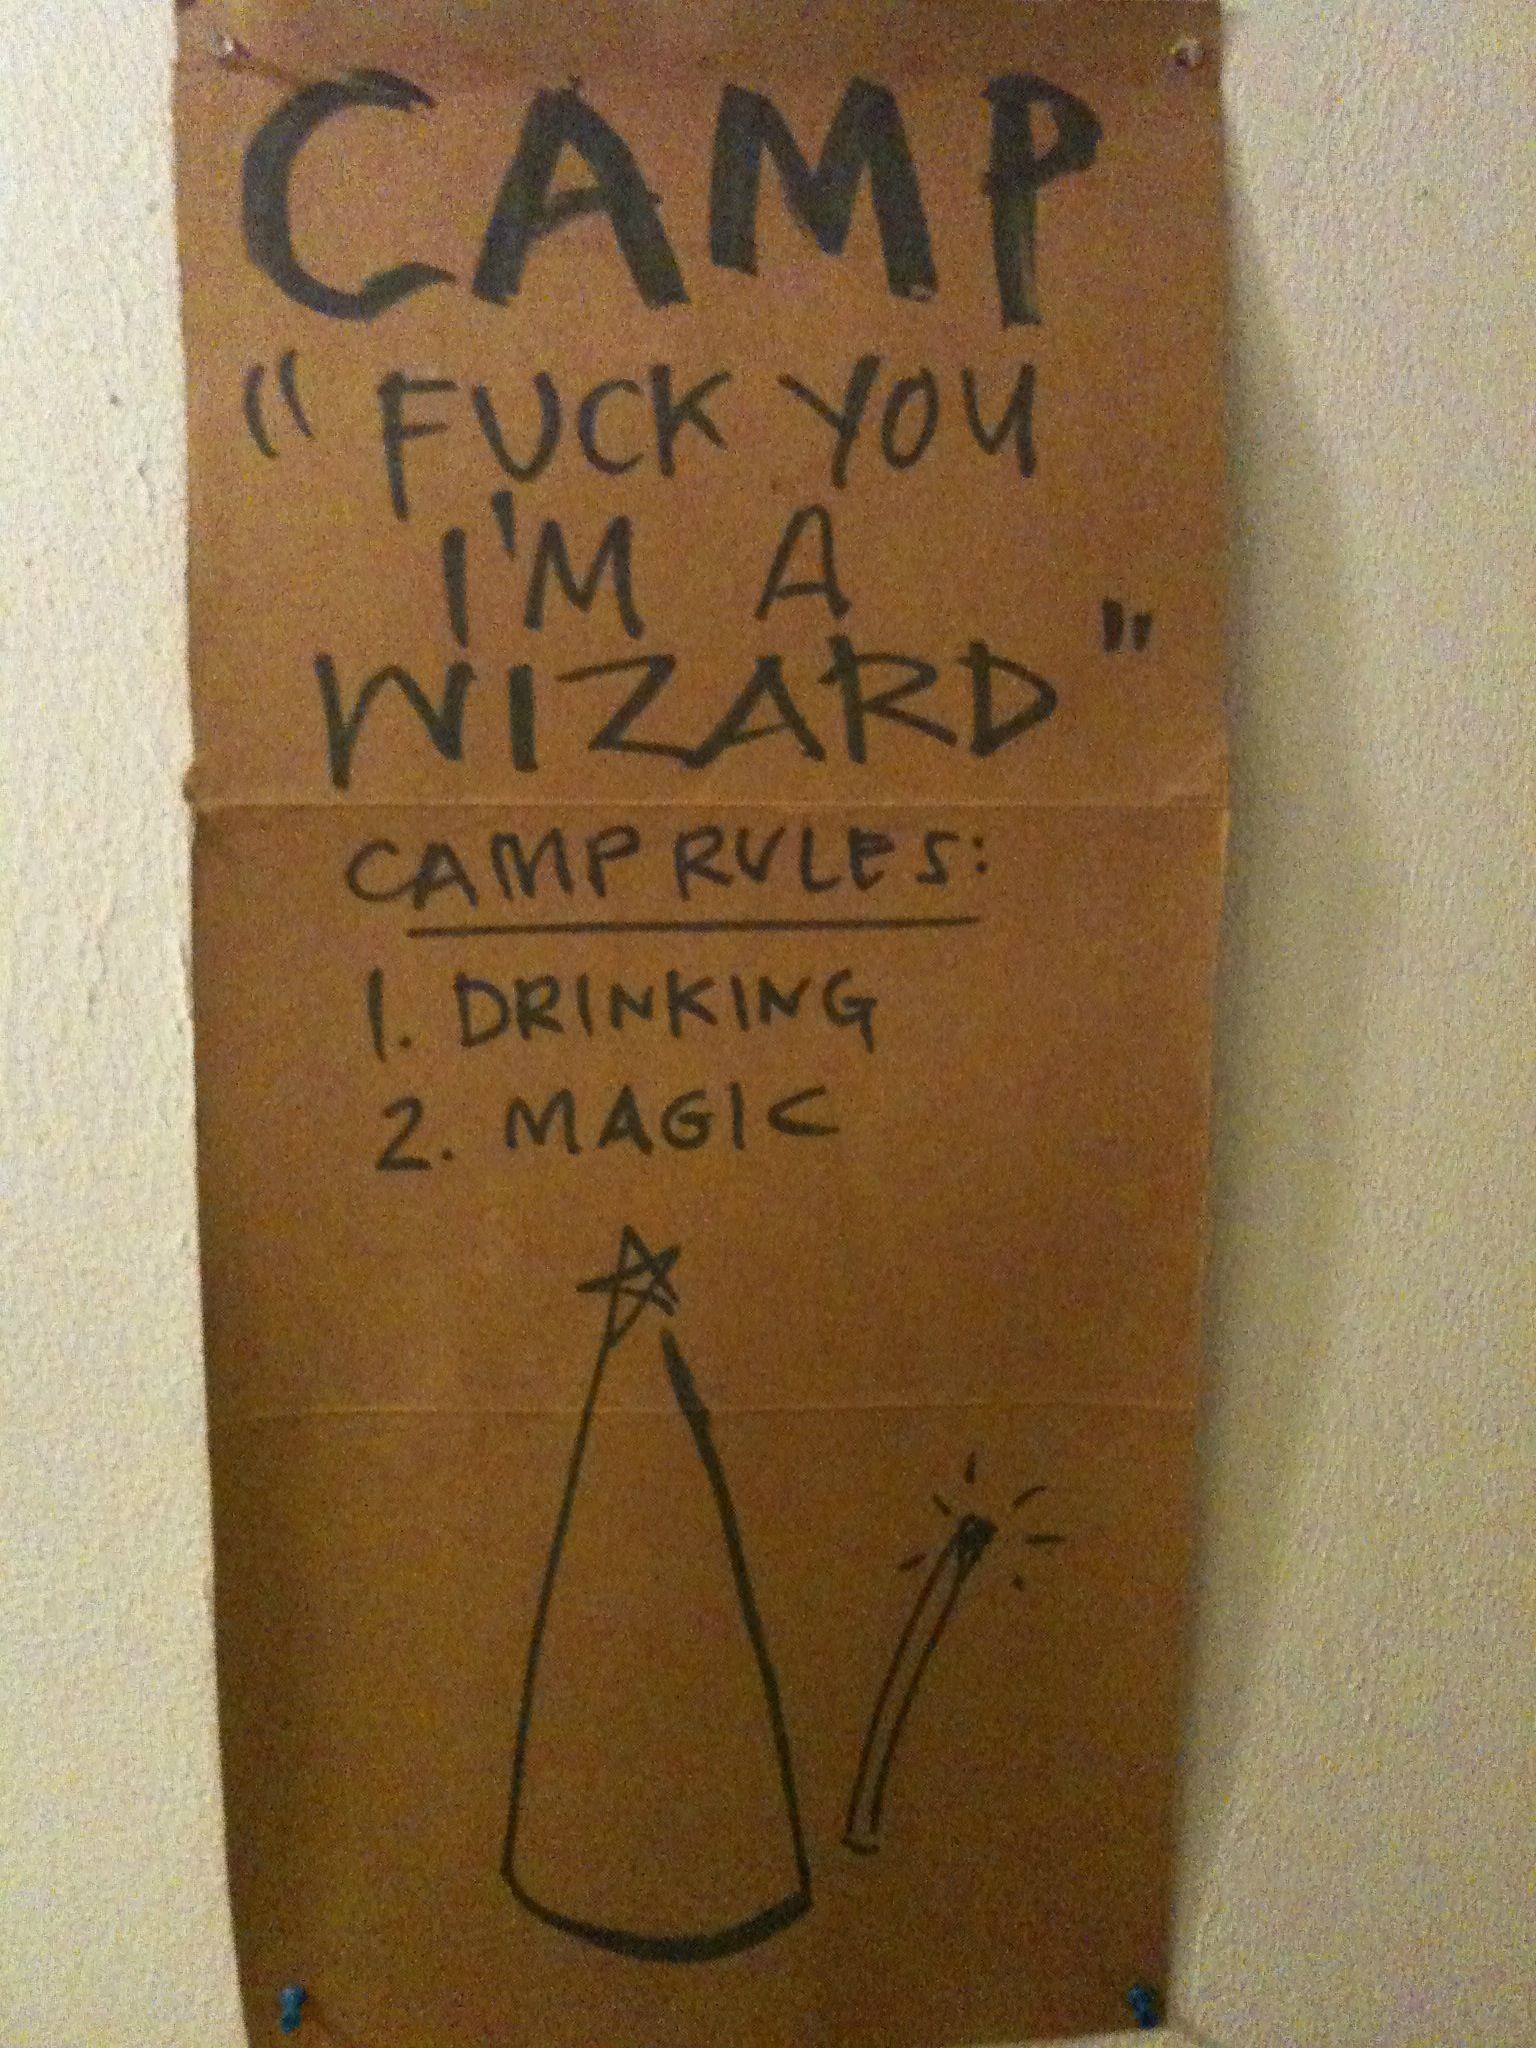 camp wizard - Camp Fuck You 'I'M A Wizard Camp Rules 1. Drinking 2. Magic